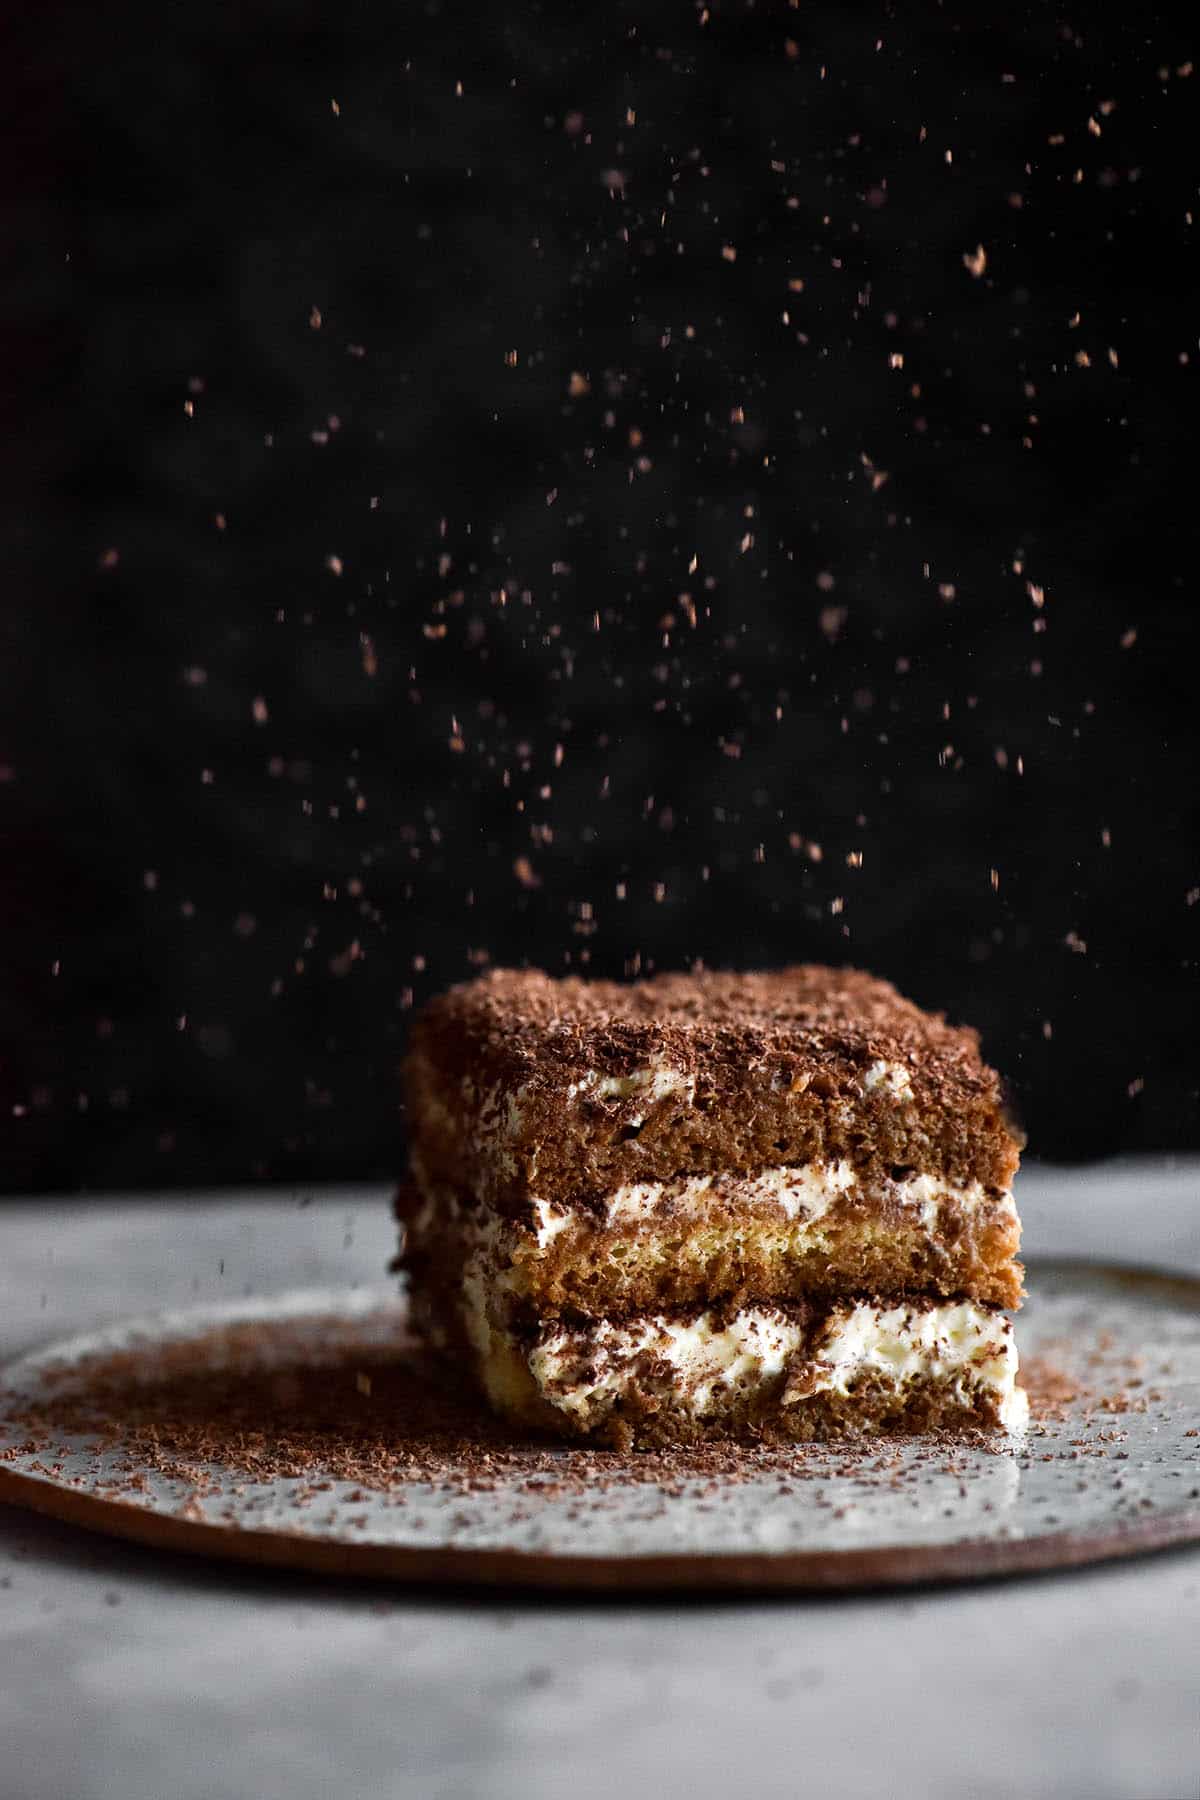 A single slice of gluten free, lactose free Tiramisu sits atop a small white ceramic plate atop a white marble table. The tiramisu slice sits against a black background, which contrasts against the gratings of chocolate falling down from the top of the image.